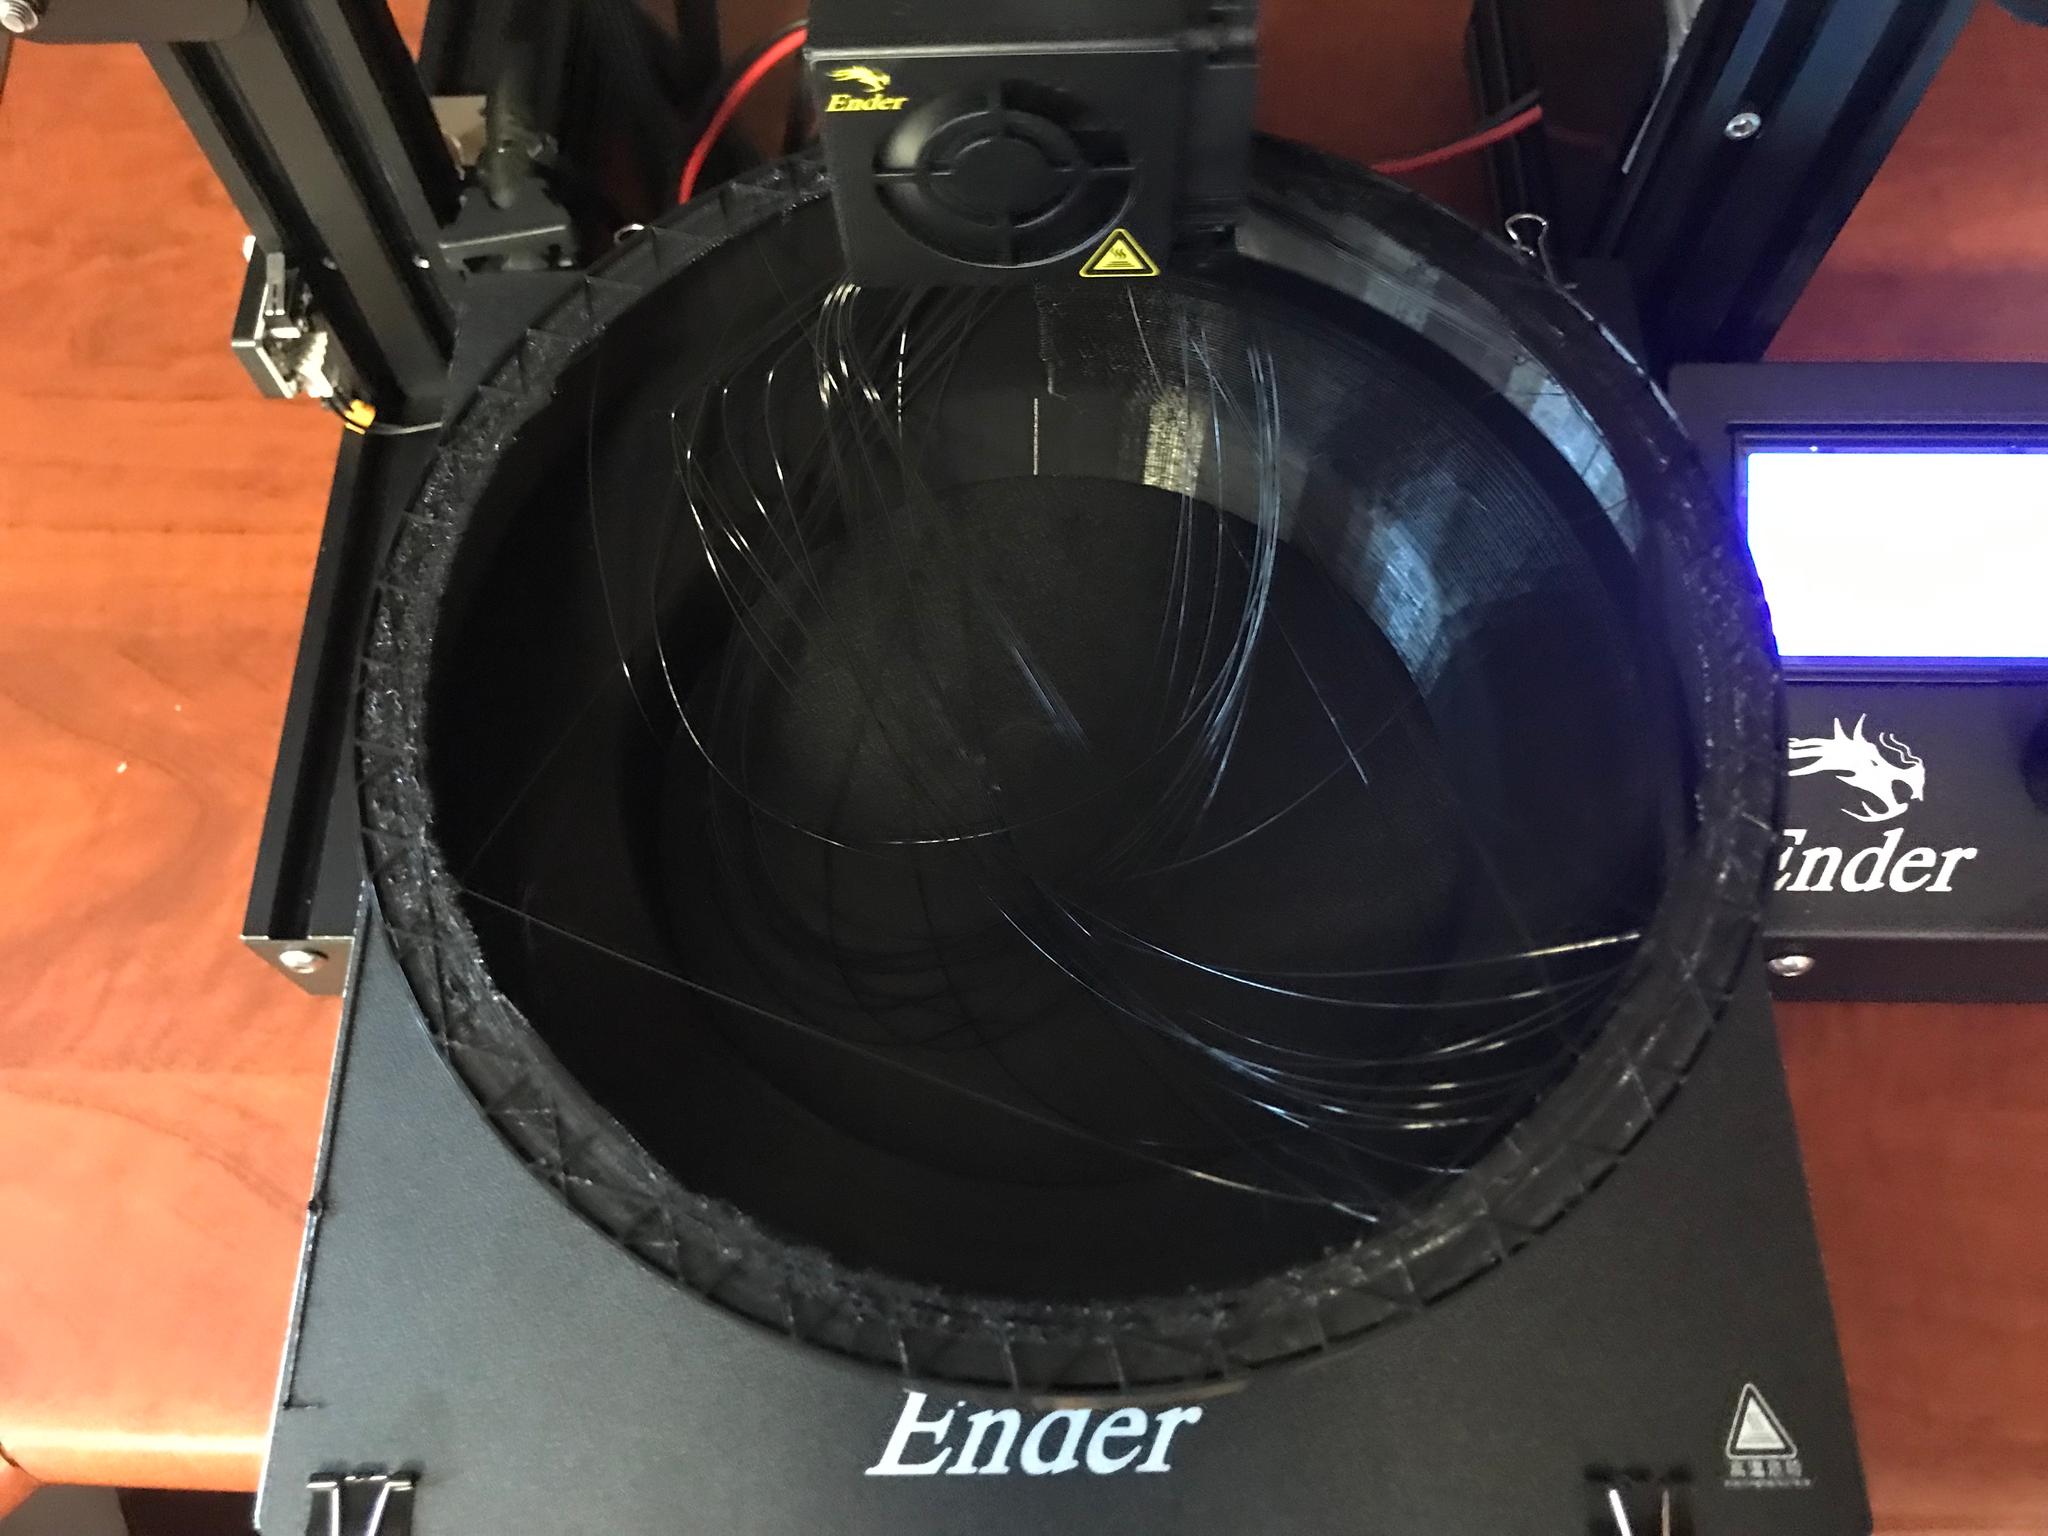 Stringy filament encountered during printing process.